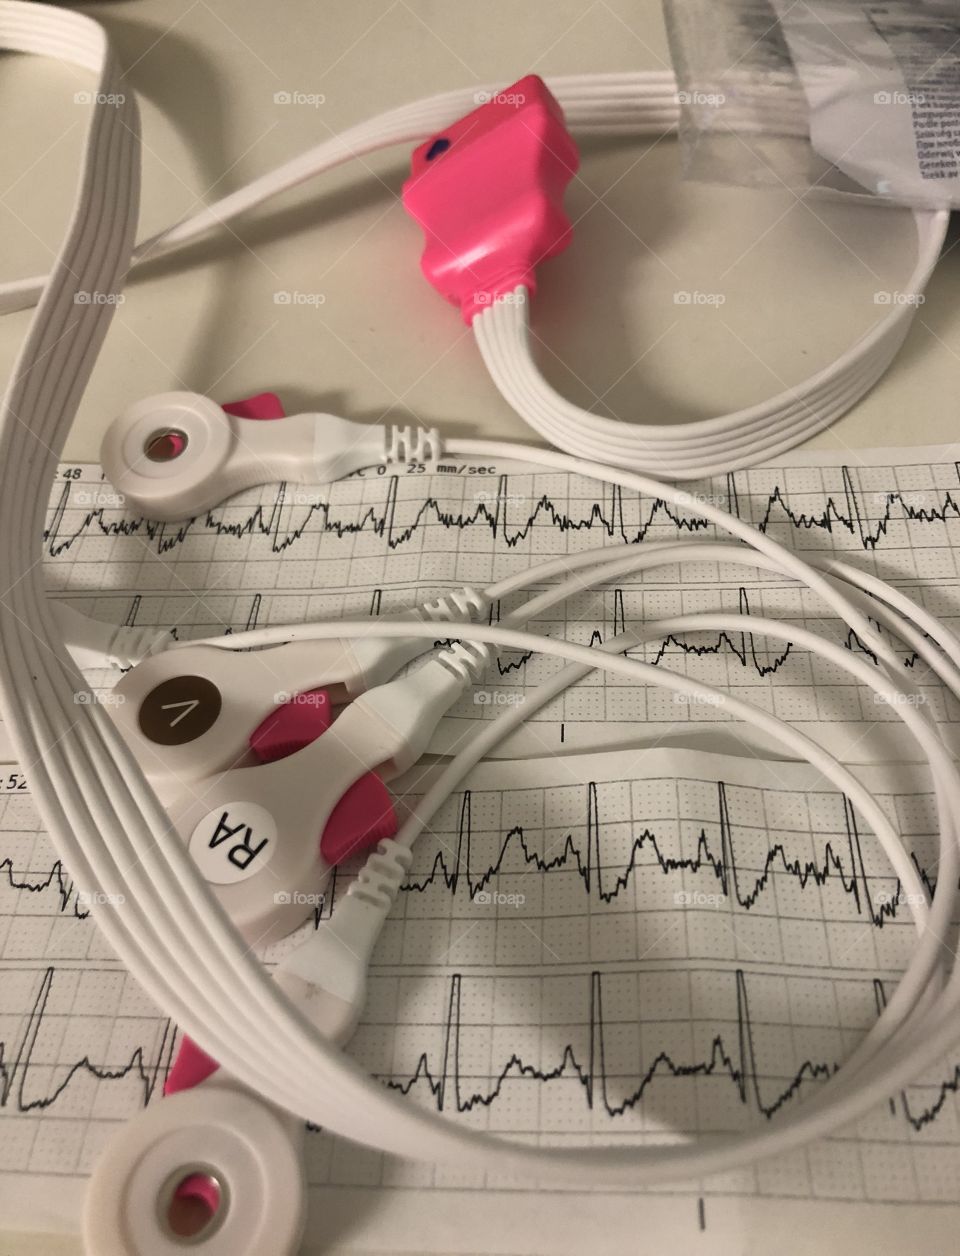 Heart Monitor Leads; Rhythm Strips; The Beat Goes On